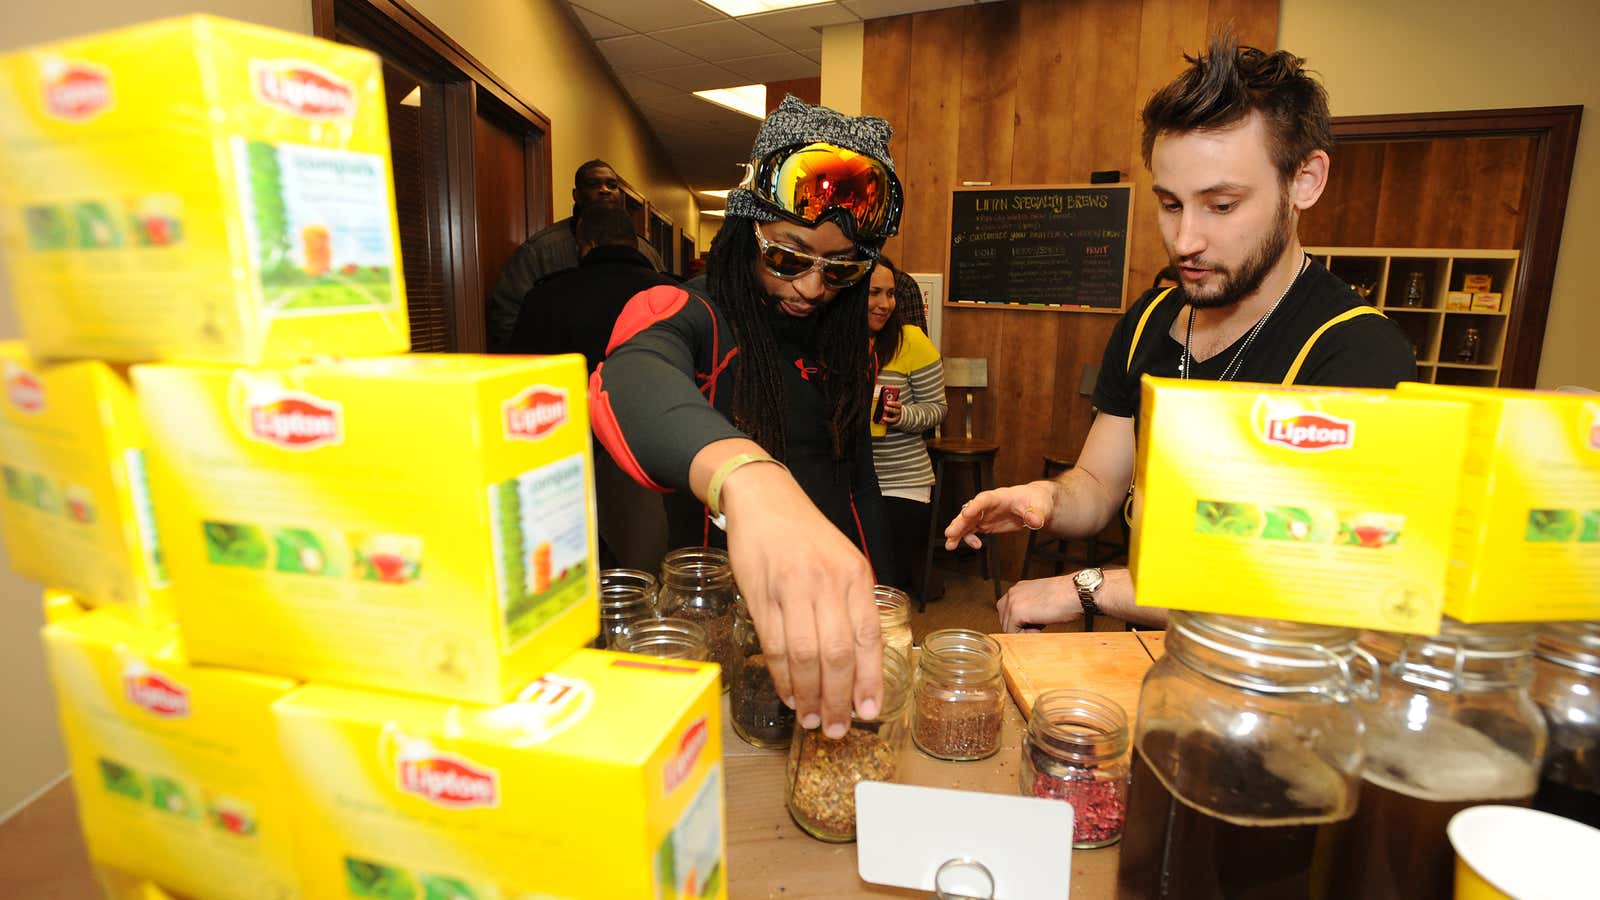 The key to securing market share in US tea: get luminary musicians such as Lil’ Jon to drink it.